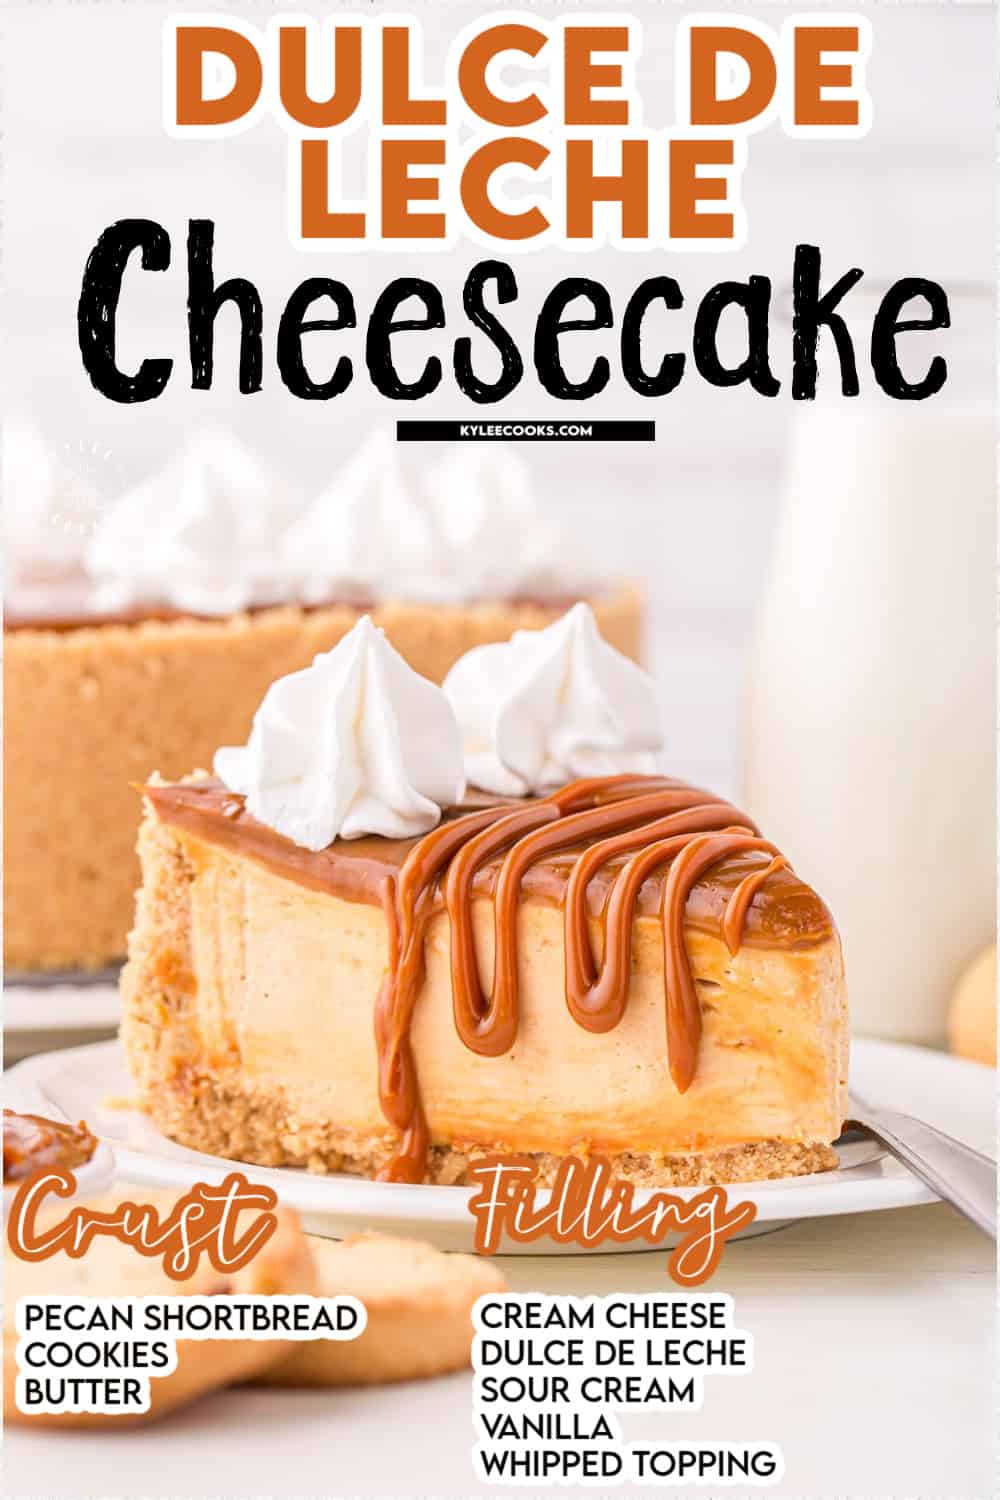 dulce de leche cheesecake with recipe name and ingredients overlaid in text.